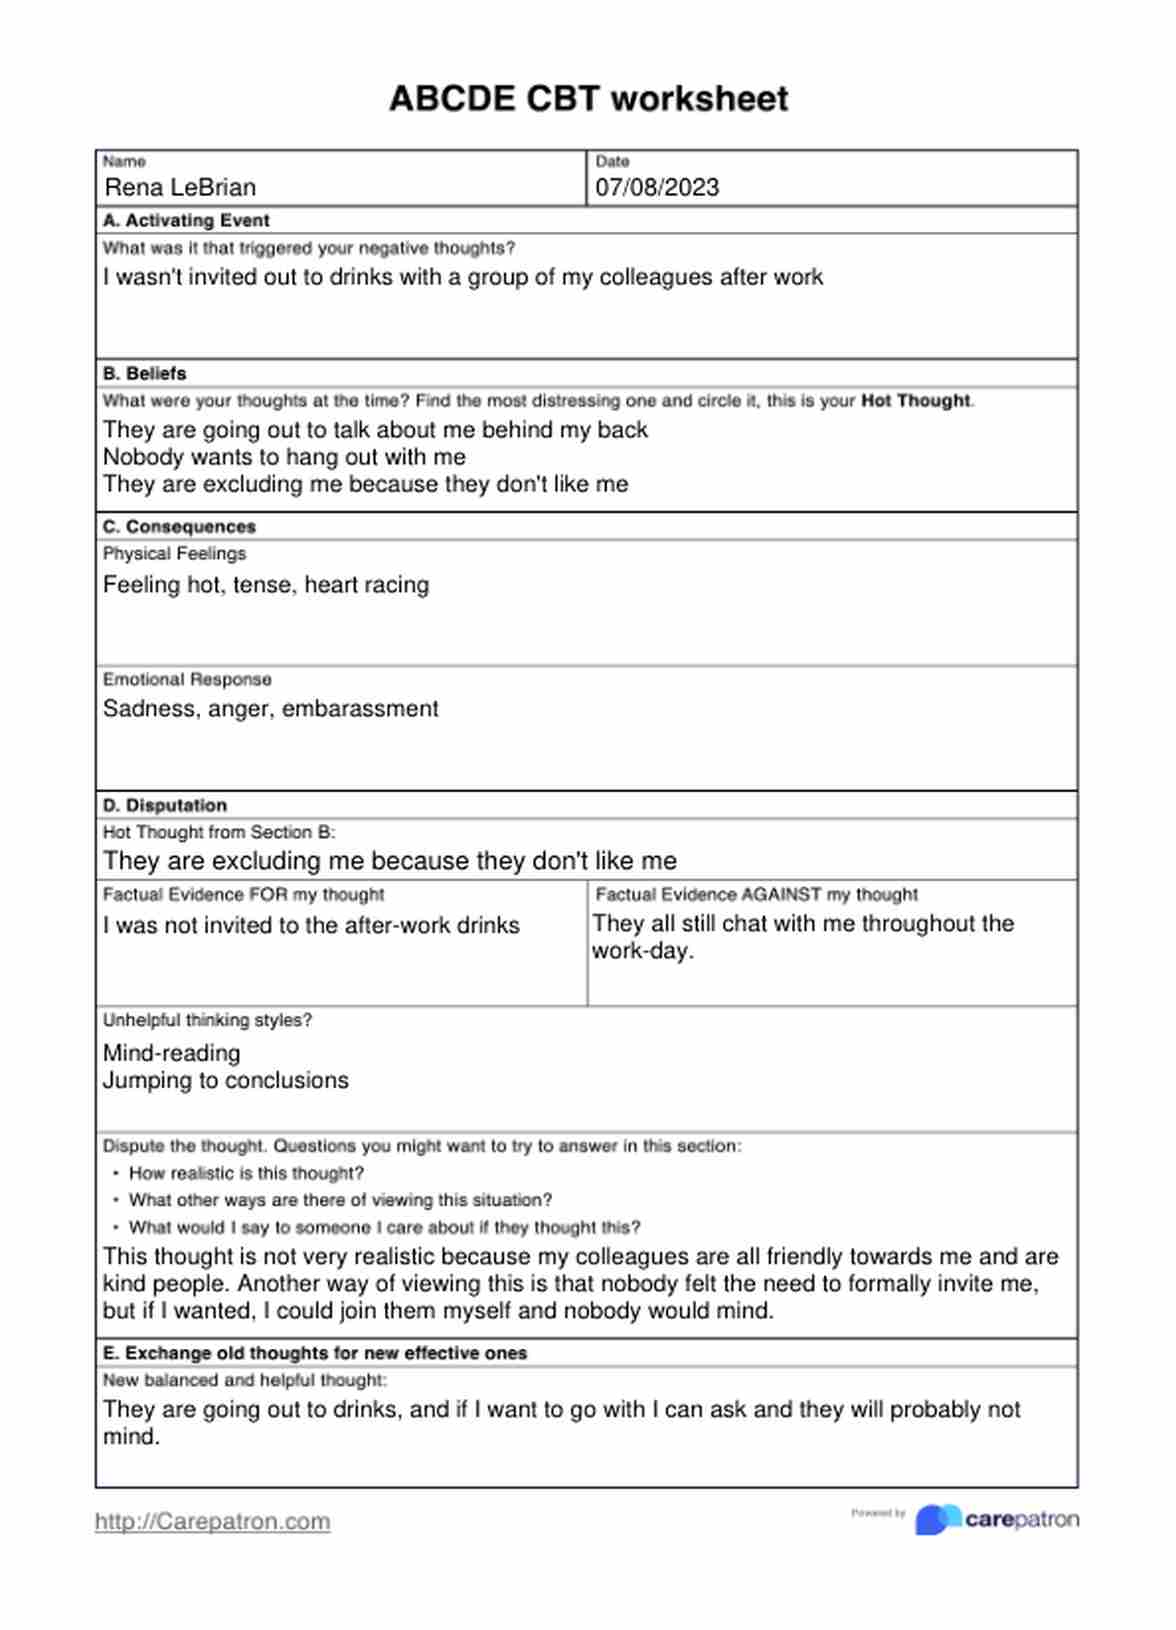 ABCDE CBT Worksheets PDF Example